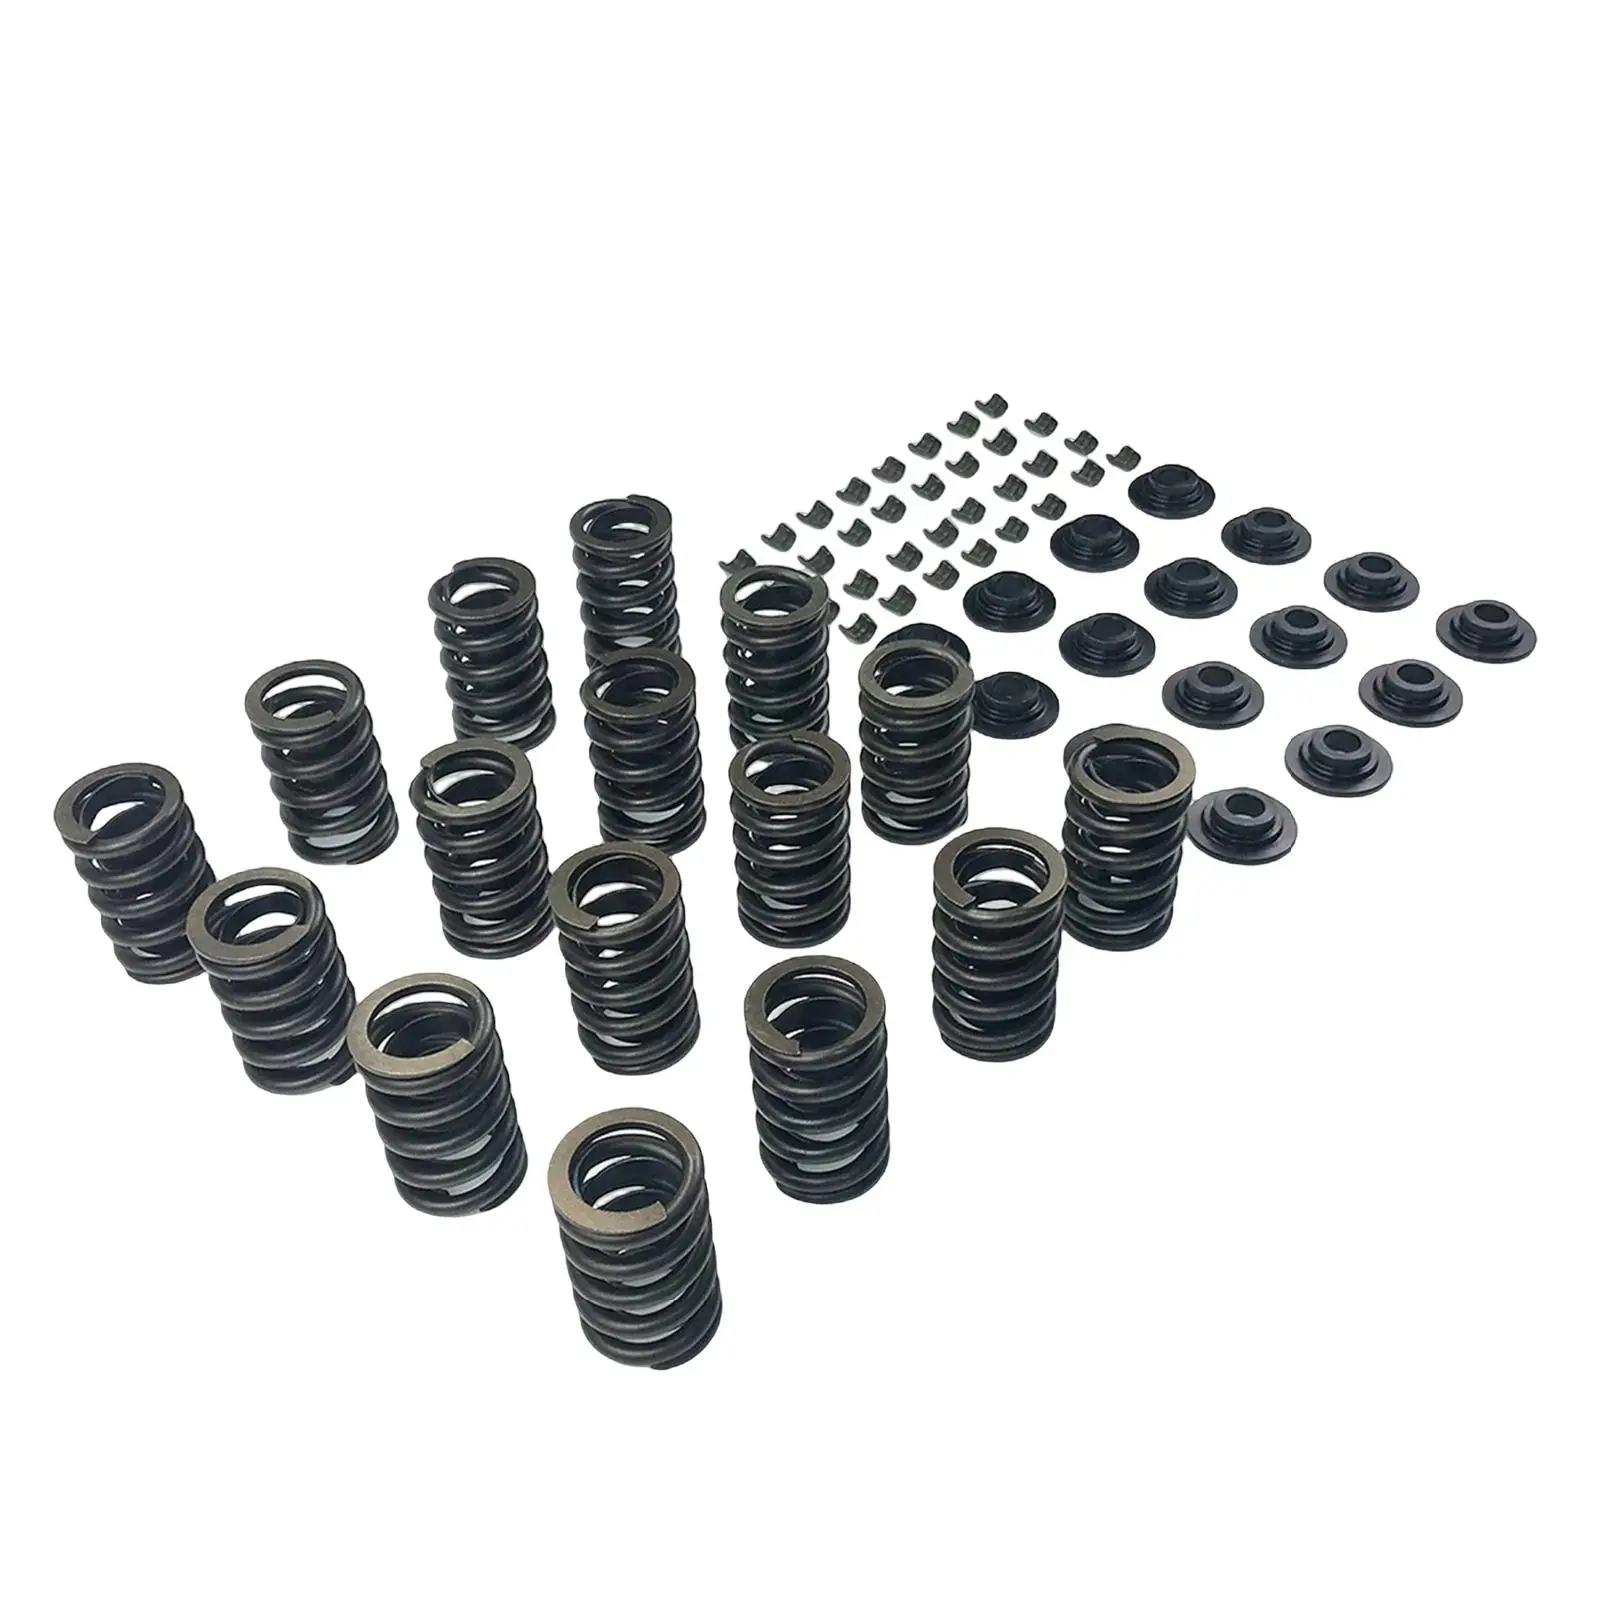 64x Valve Springs Kit with Steel Retainers HD Locks Fit for Chevy Sbc 327 350 400 Automobiles Components Professional Engines